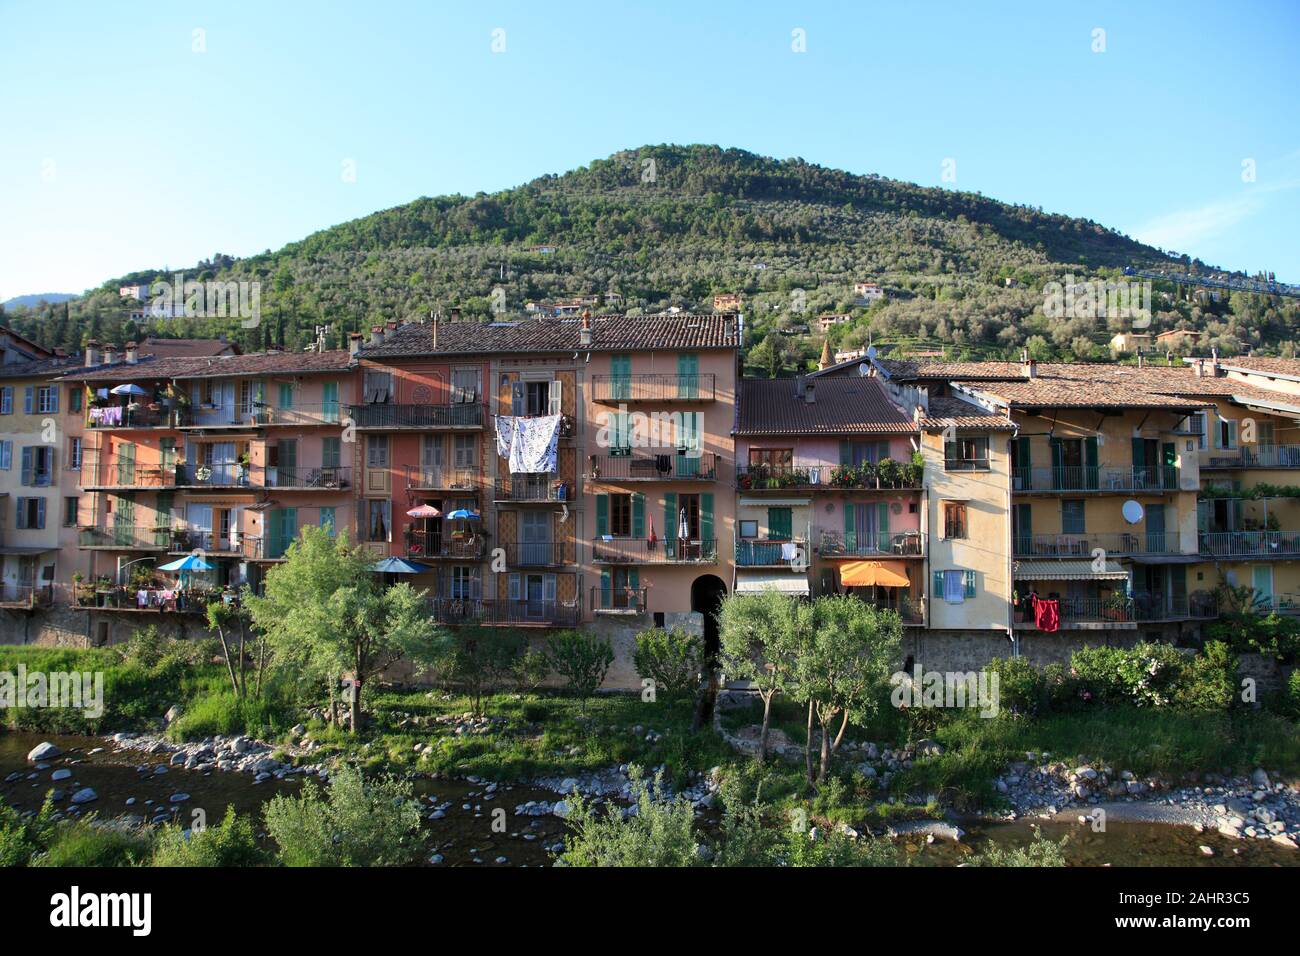 The Village of Sospel, Old Town, Roya Valley, Alpes-Maritimes, Cote d'Azur, Provence, France, Europe Stock Photo